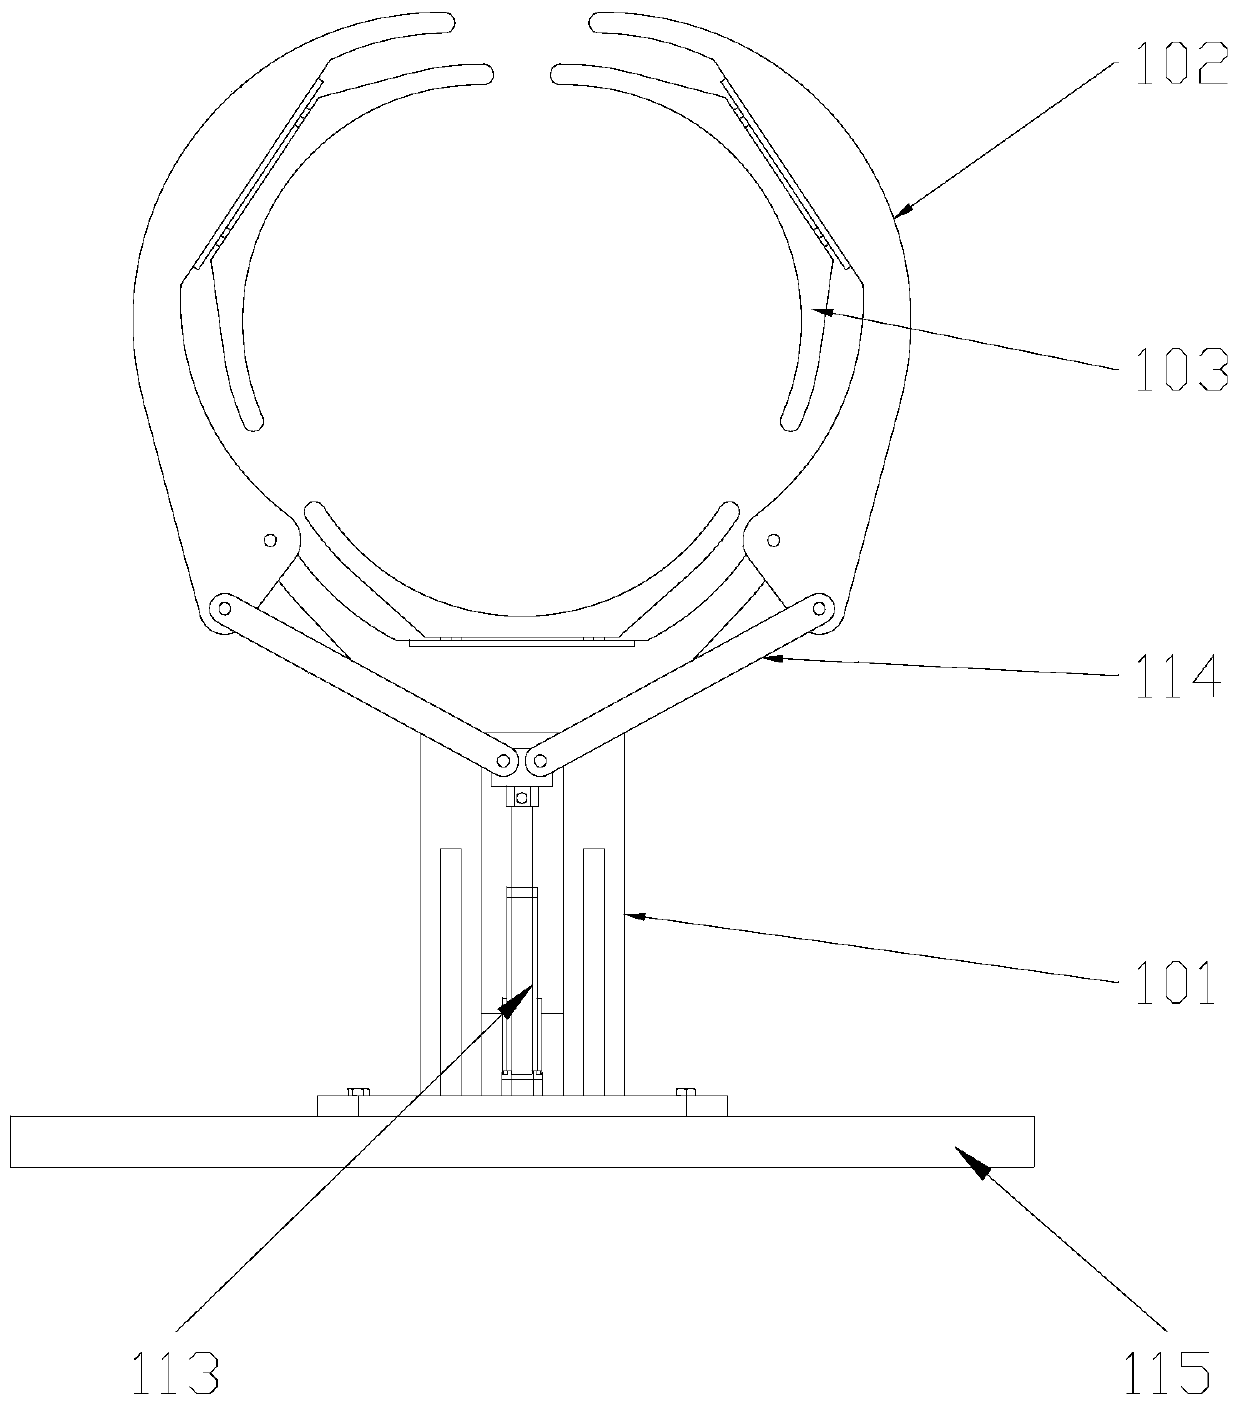 Follower fixture for shaft products, and fixture unit thereof